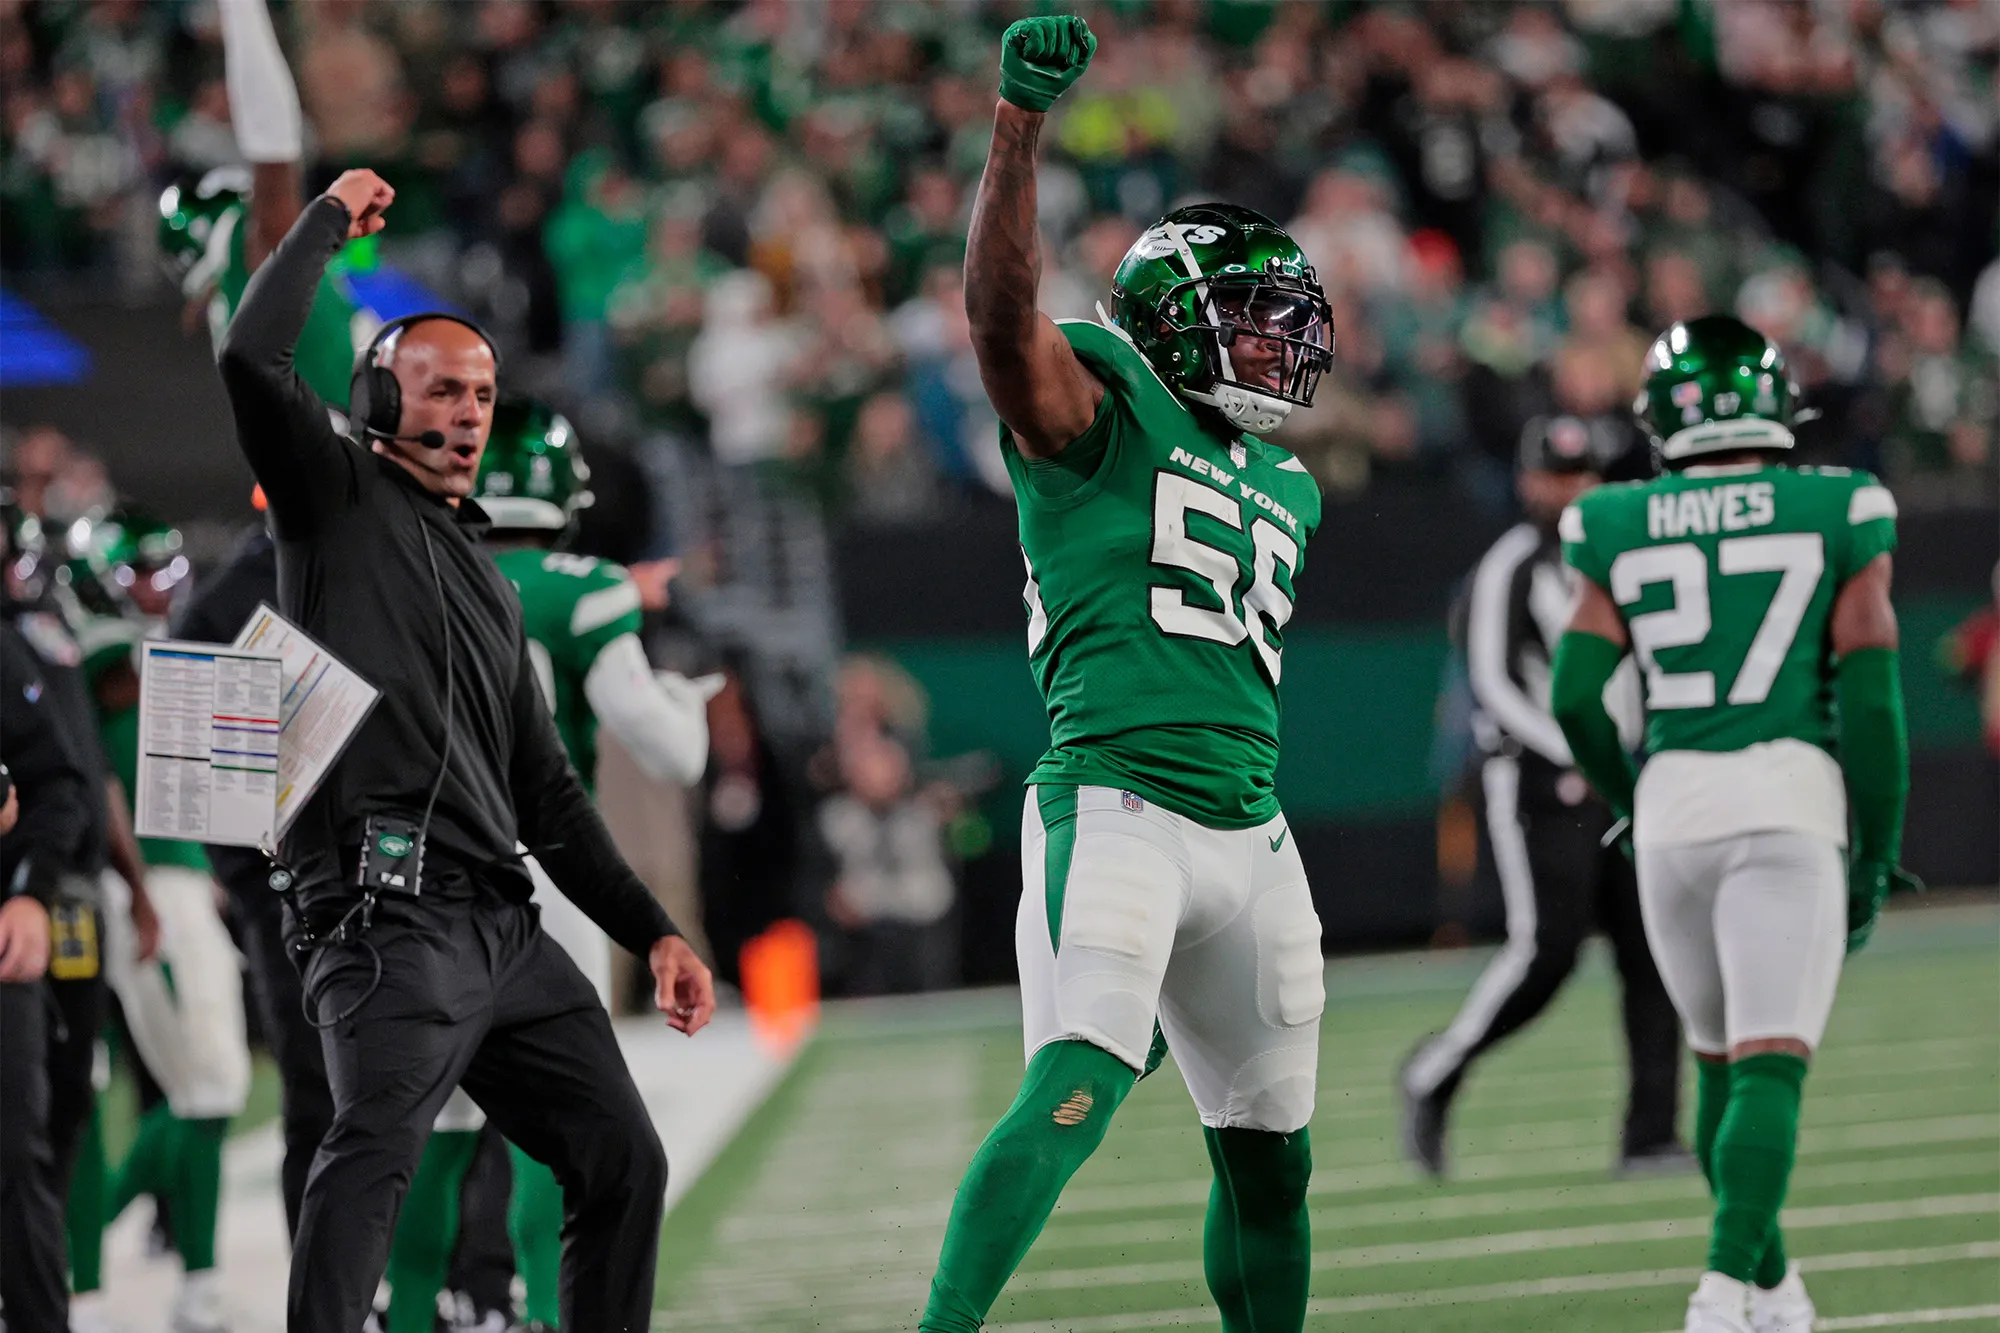 New York Jets Make History with Upset Victory Over Philadelphia Eagles, Ending the Last Undefeated Streak